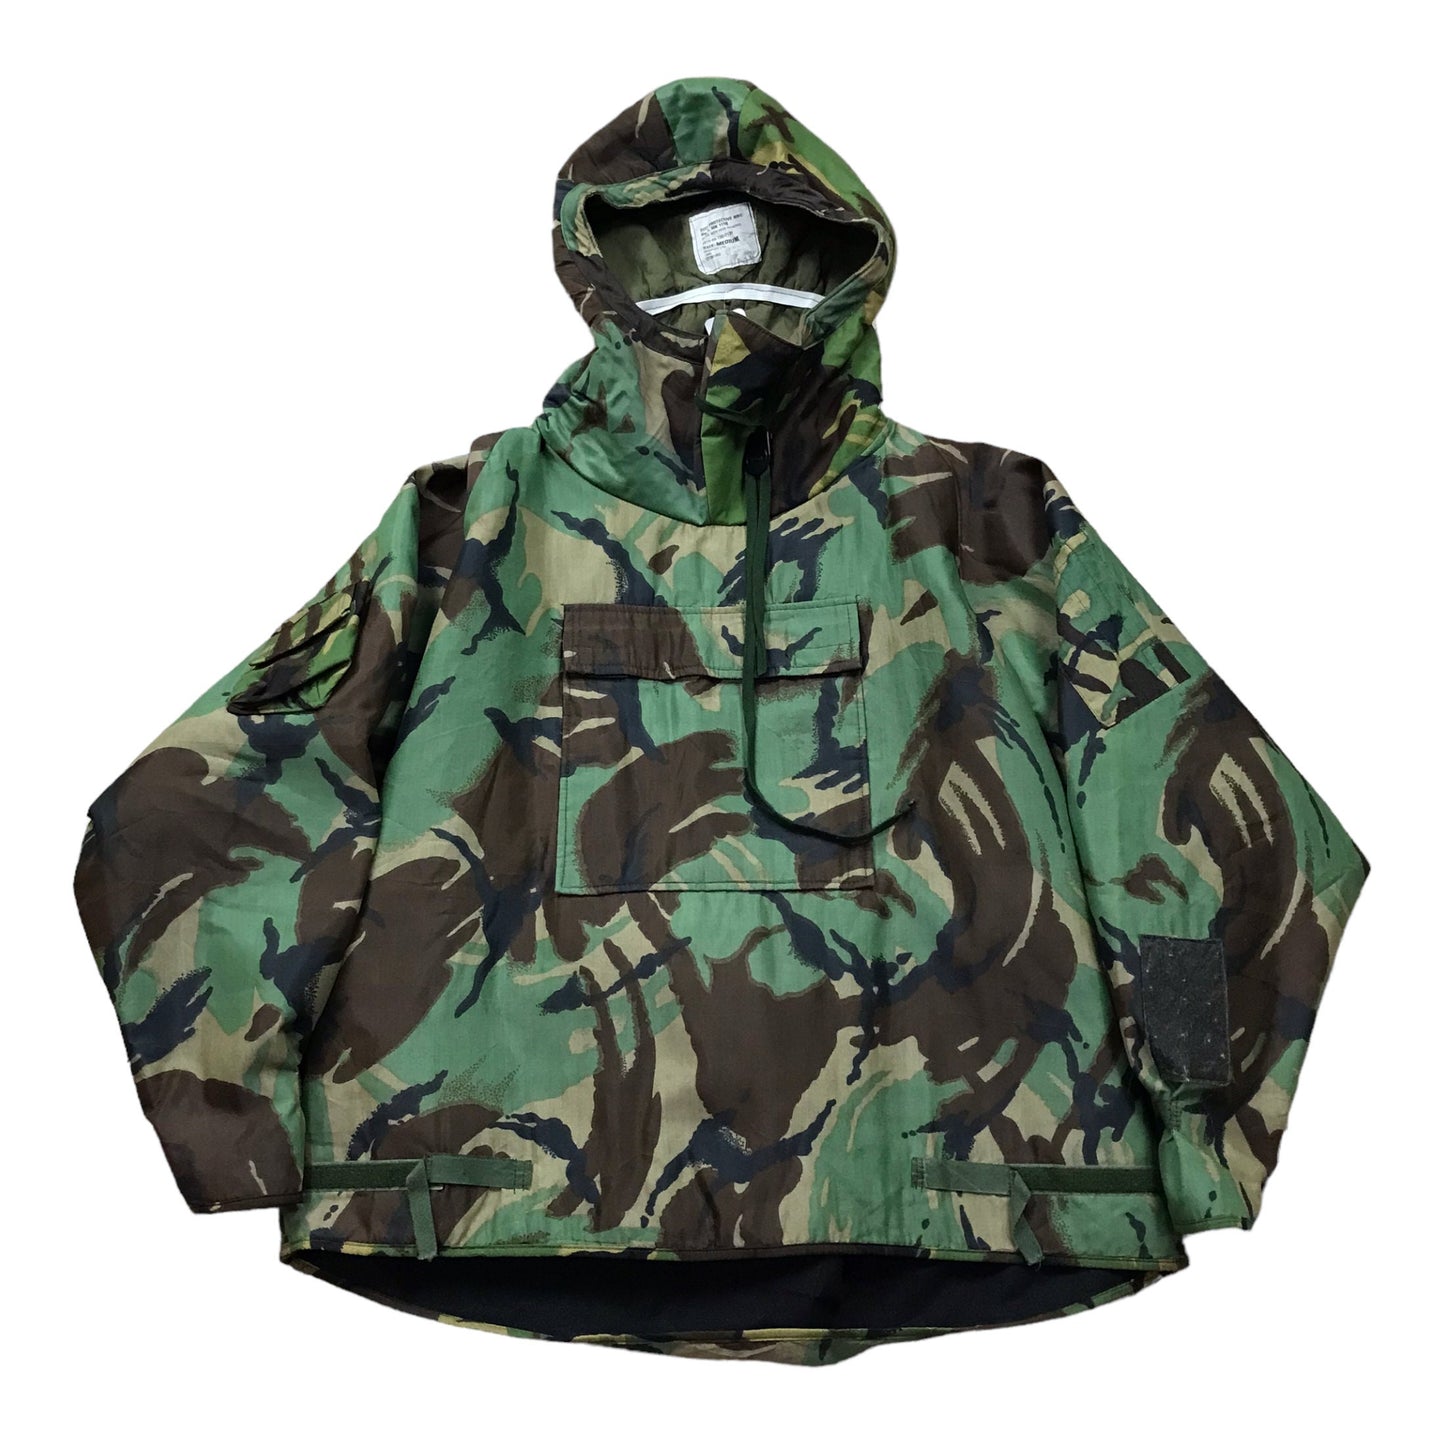 1980s 1985 British Army DPM Hooded Smock Size M/L